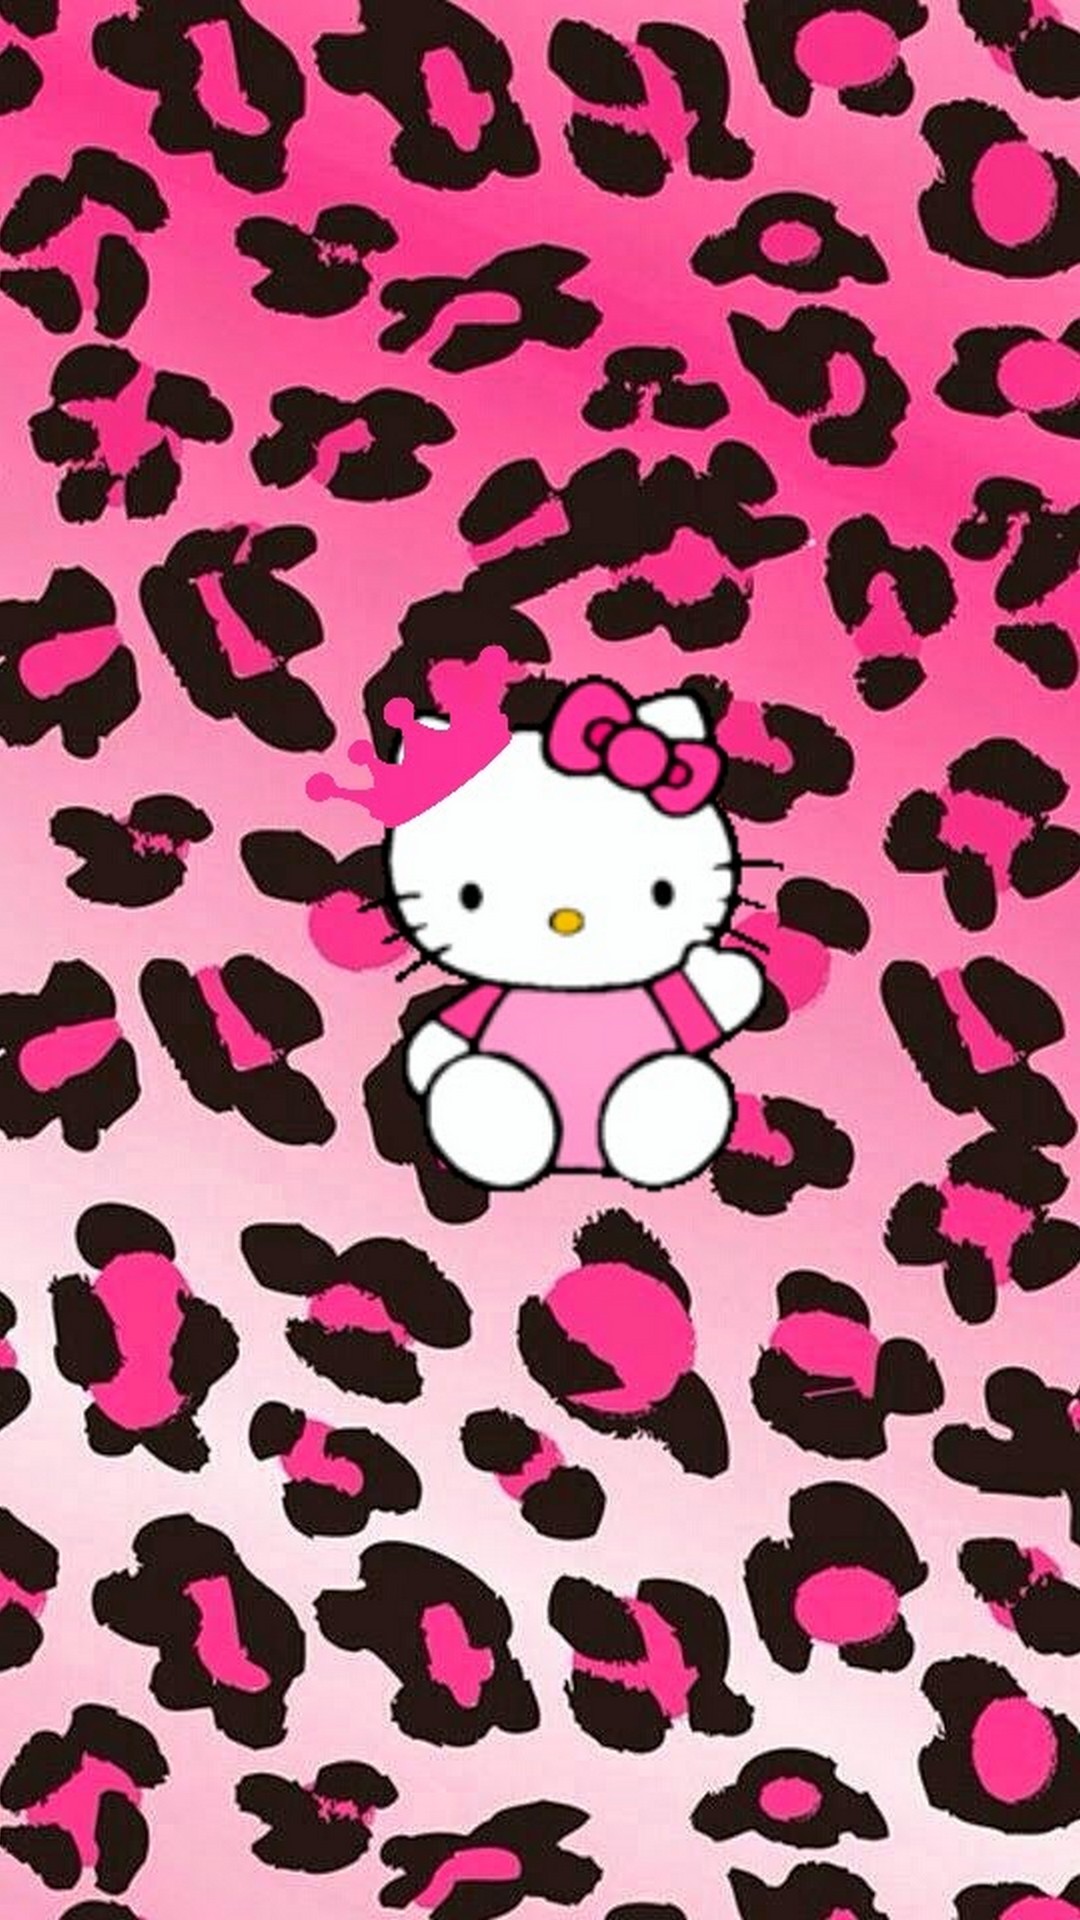 Wallpaper Sanrio Hello Kitty iPhone with resolution 1080X1920 pixel. You can make this wallpaper for your iPhone 5, 6, 7, 8, X backgrounds, Mobile Screensaver, or iPad Lock Screen